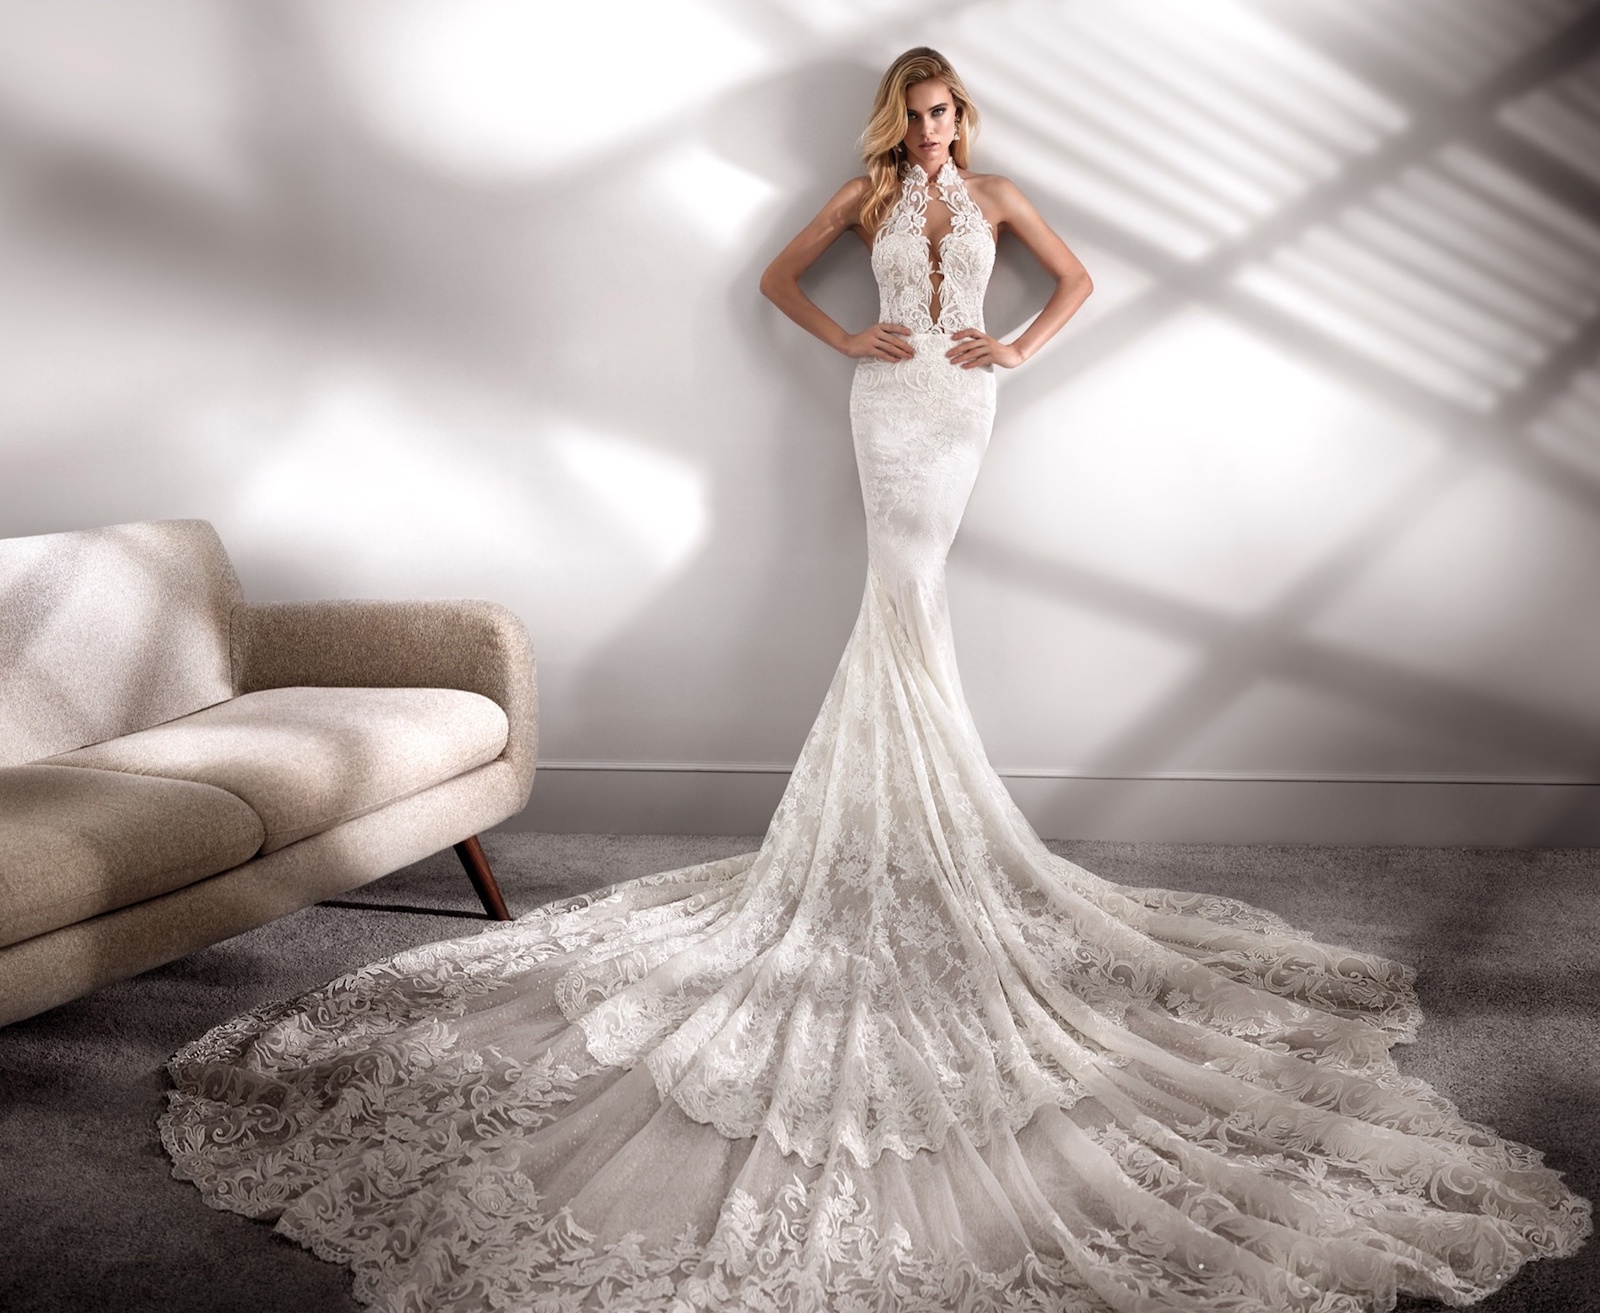 How to Prepare for Your First Wedding Dress Fitting